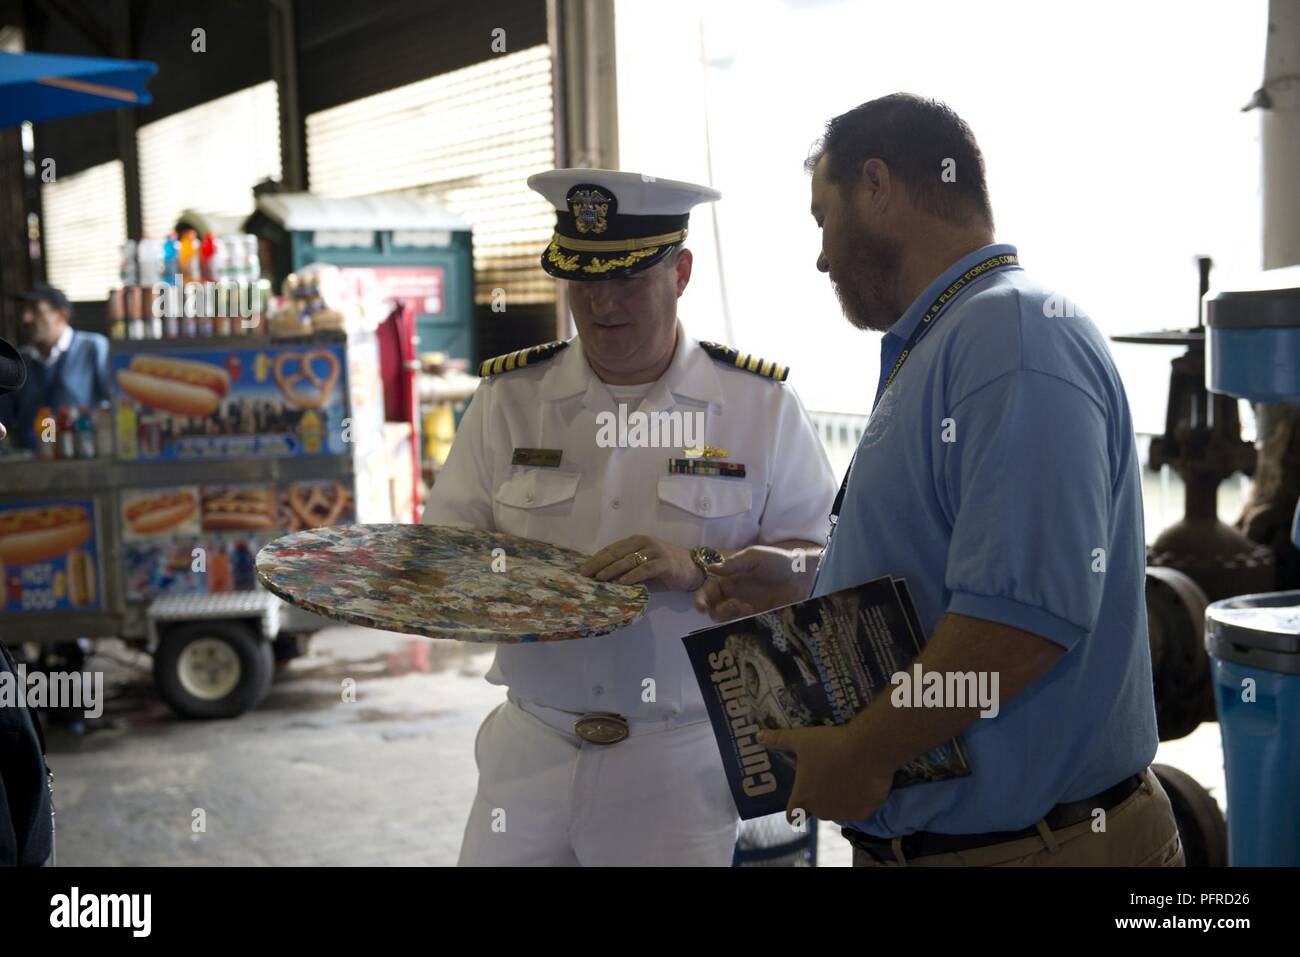 NEW YORK (May 27, 2018) Michael Jones, the environmental resources and planning section head for U.S. Fleet Forces Command’s Fleet Environmental and Readiness Division, explains the shipboard waste process to reduce plastic waste aboard ships at the U.S. Navy’s “Stewards of the Sea: Defending Freedom, Protecting the Environment” exhibit during Fleet Week New York. The Navy employs every means available to mitigate the potential environmental effects of our activities without jeopardizing the safety of our Sailors or impacting our Navy readiness mission. Stock Photo